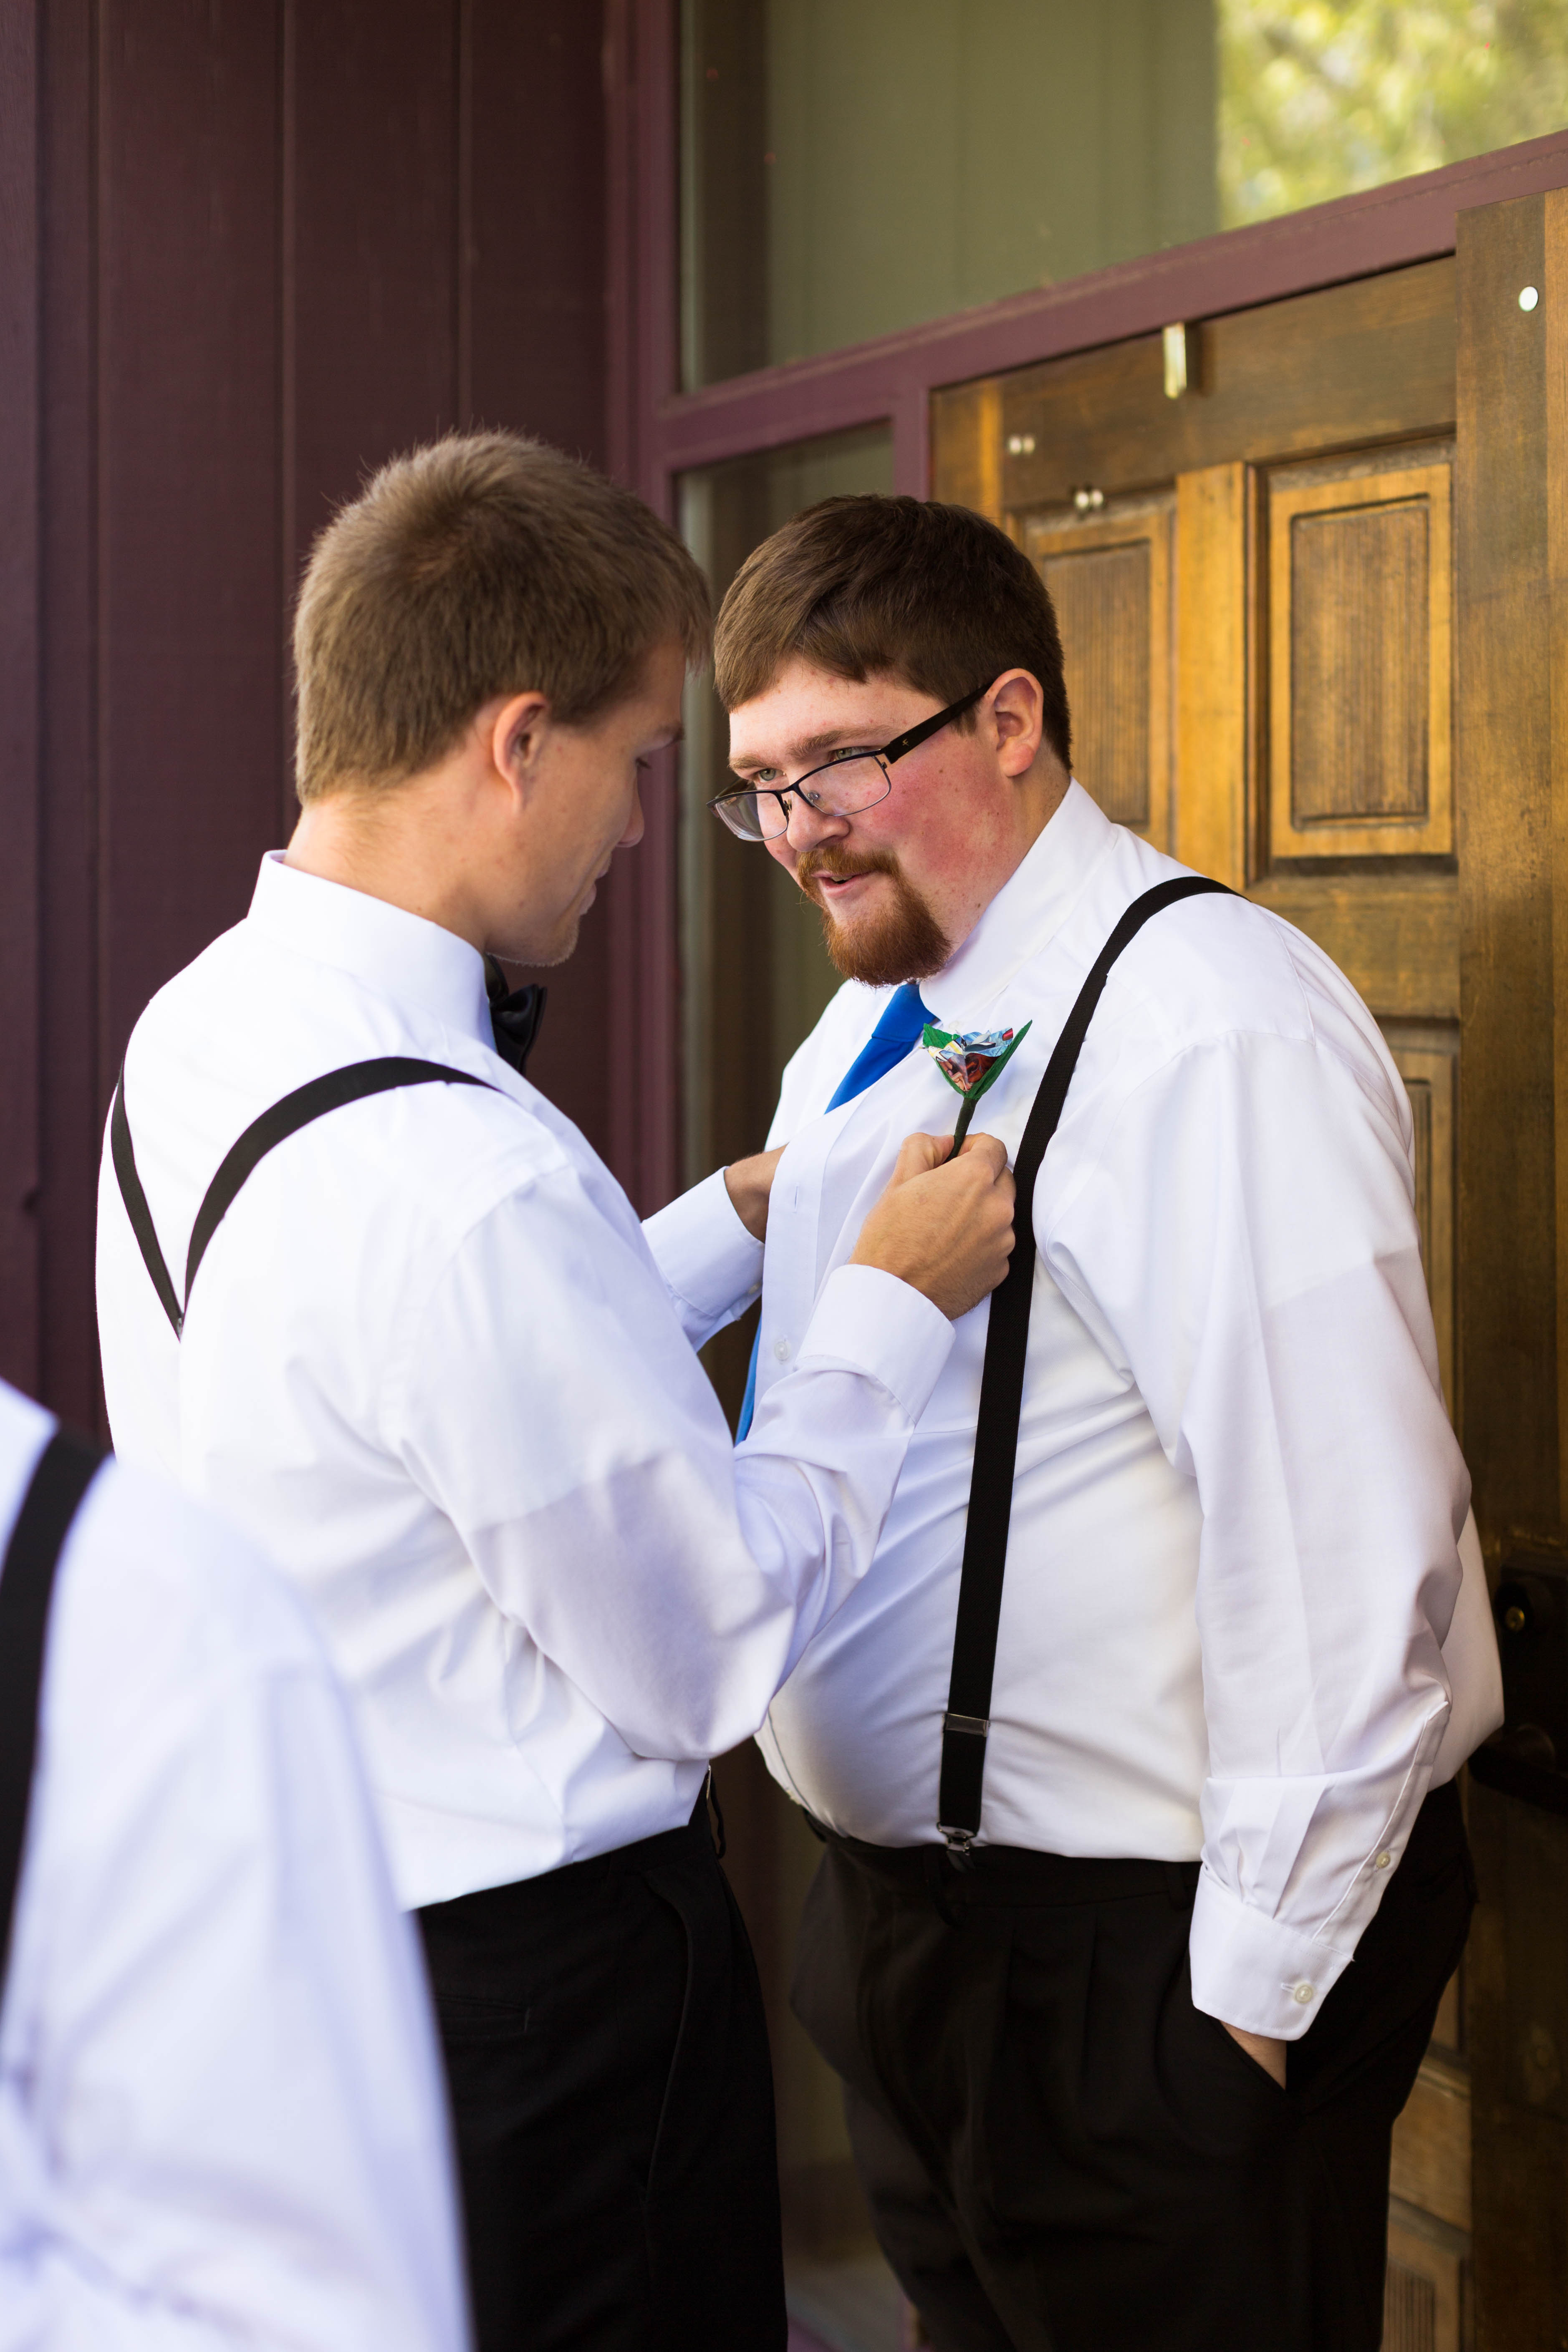 groom smiles as his best man helps him put on his boutonniere